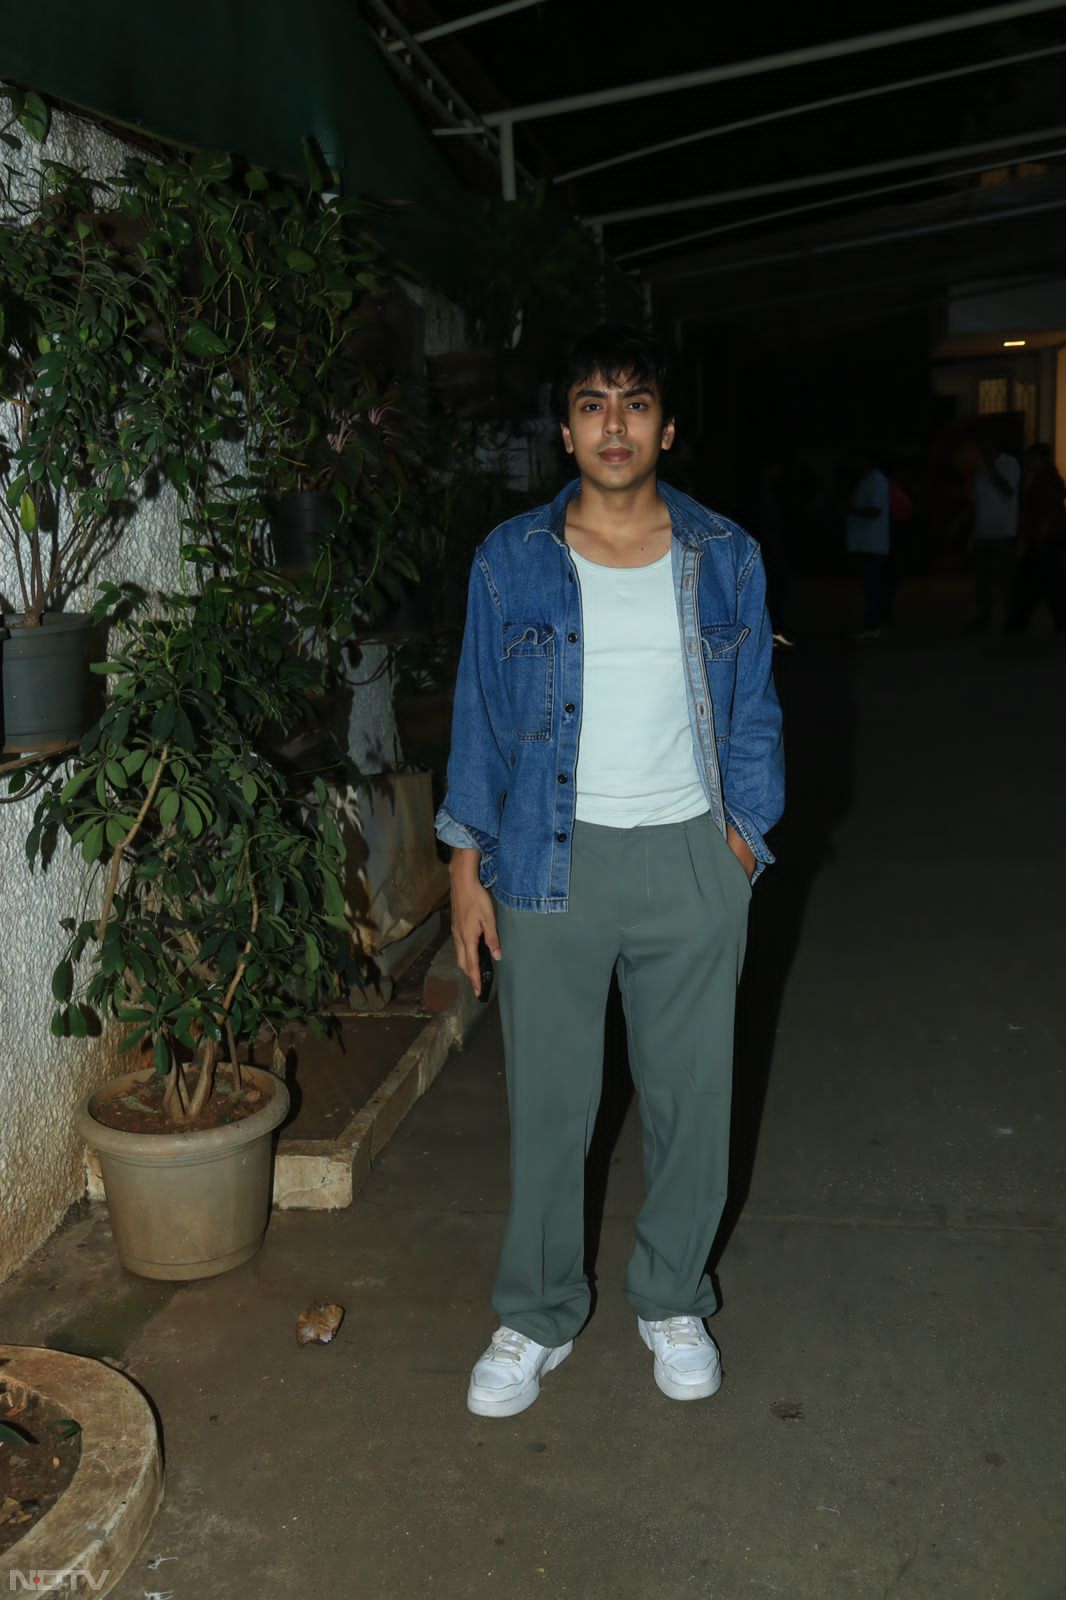 Taare Zameen Par: Vicky Kaushal, Shilpa Shetty And Others